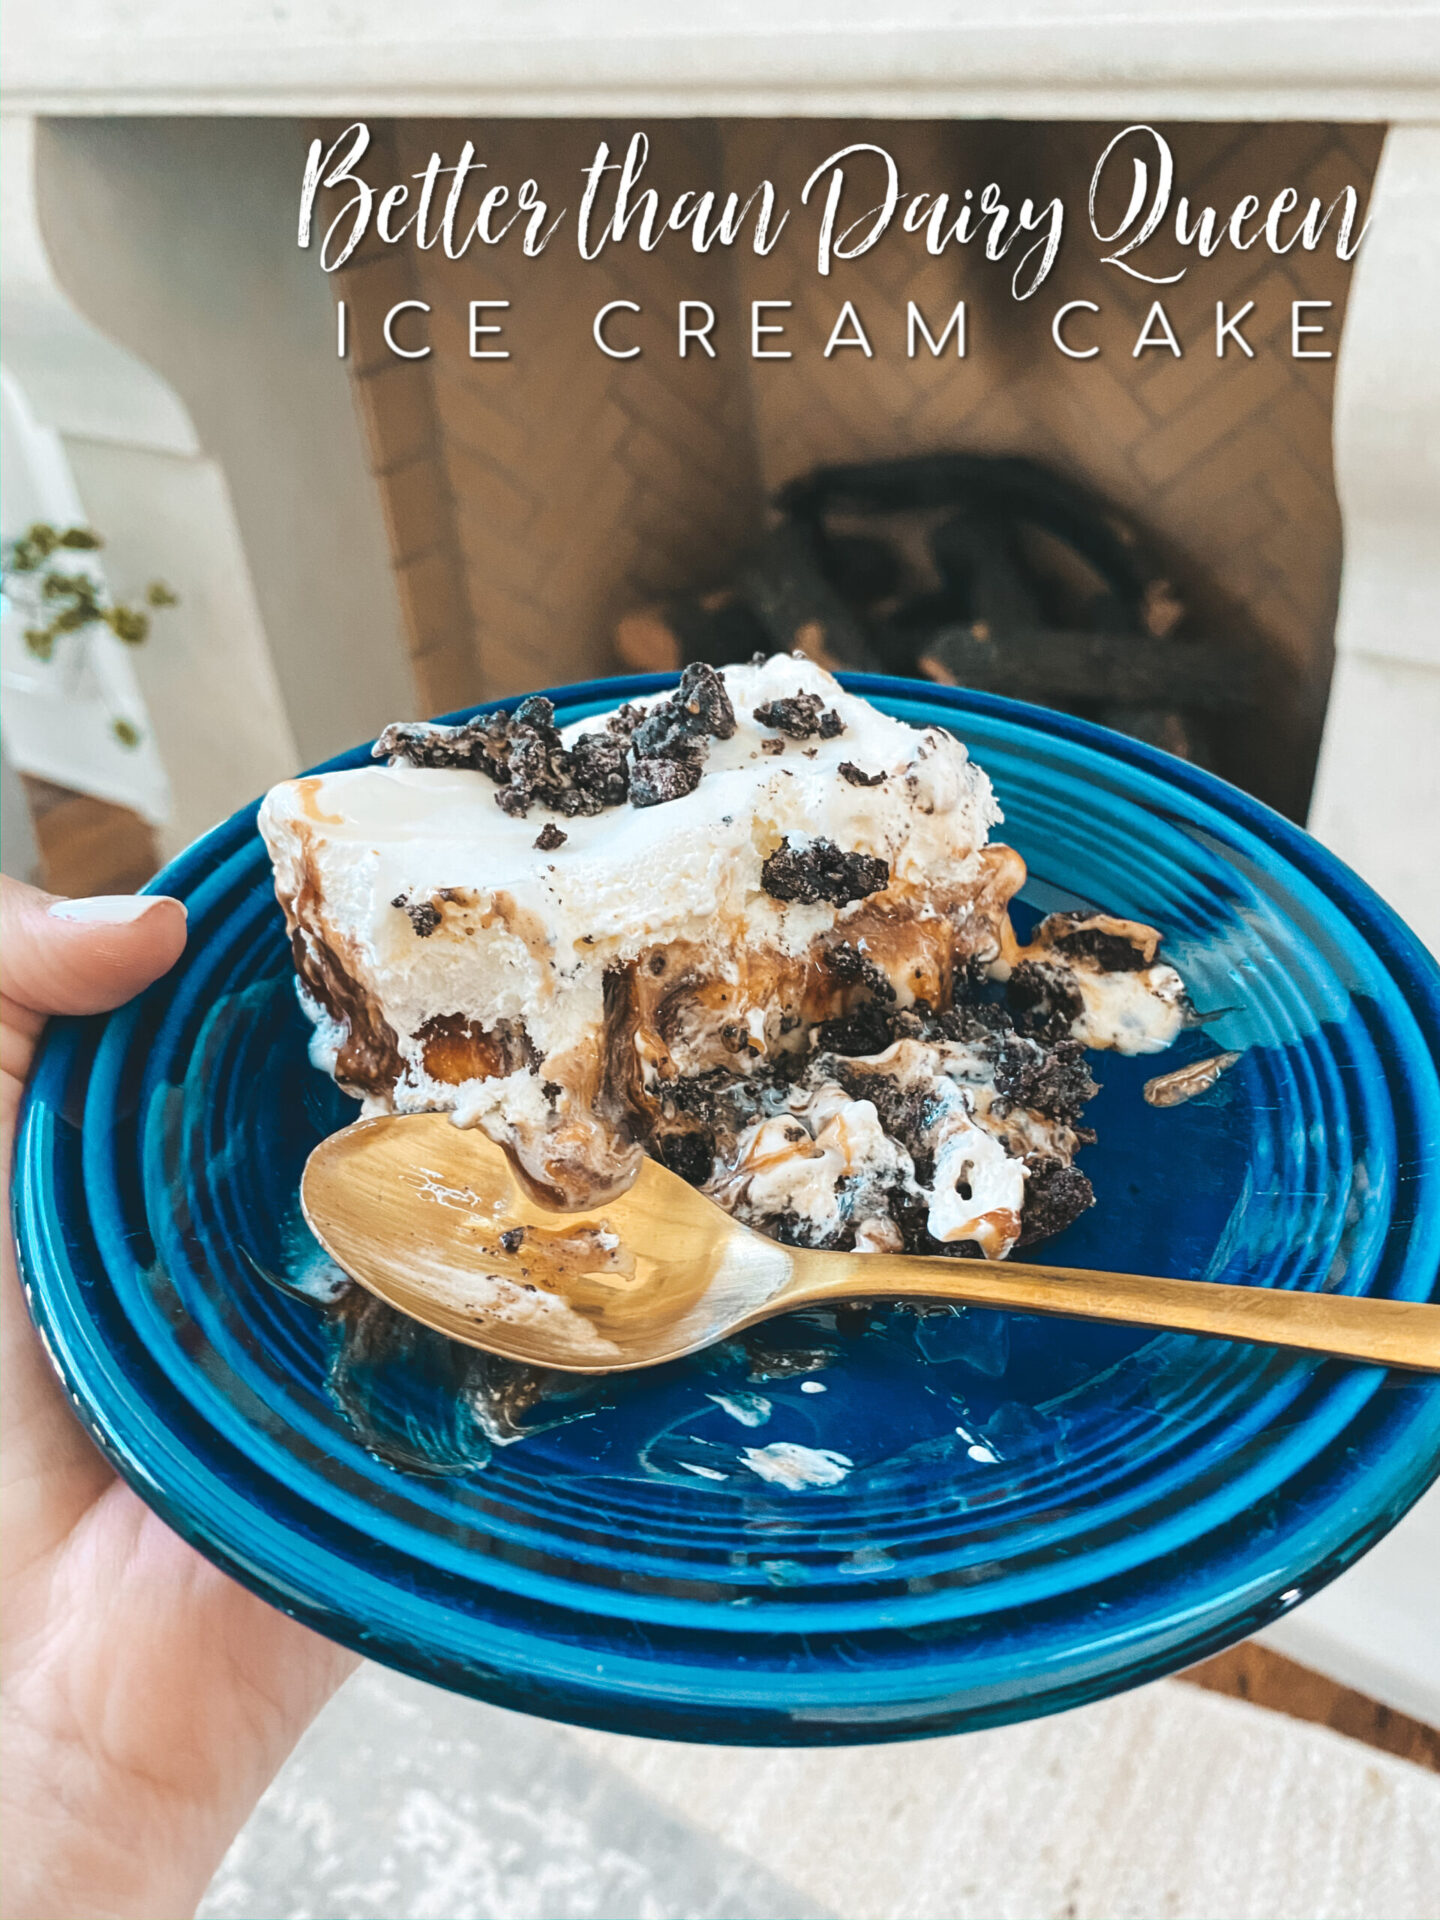 Mom's Ice Cream Cake (Better than Dairy Queen!)